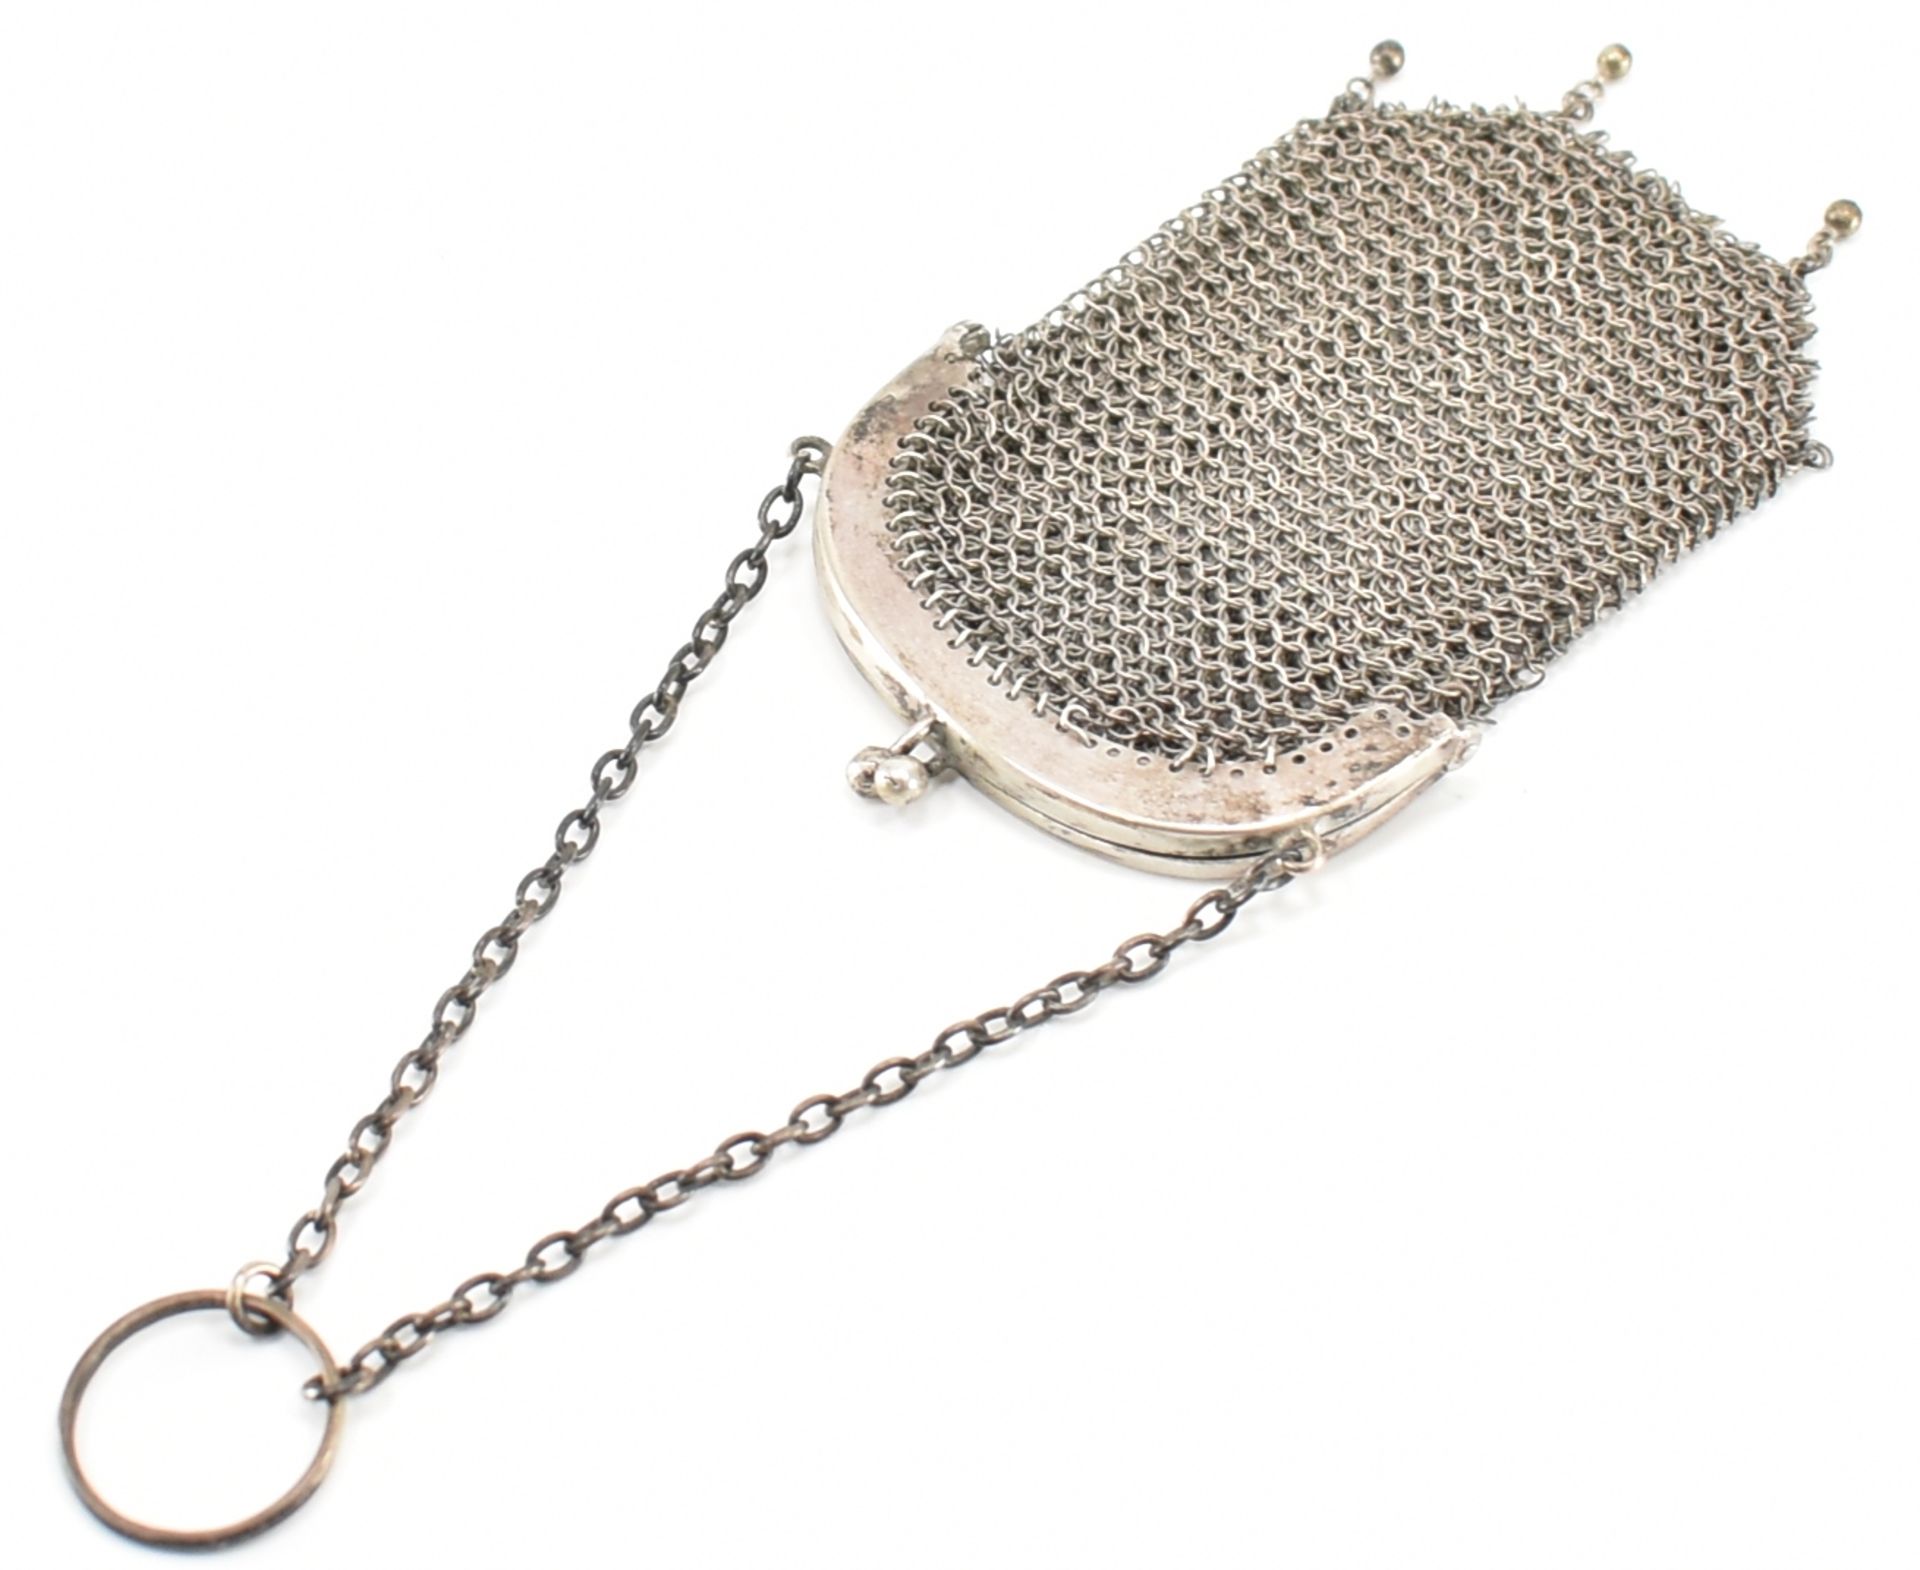 SILVER WHITE METAL CHAINMAIL PURSE - Image 2 of 4